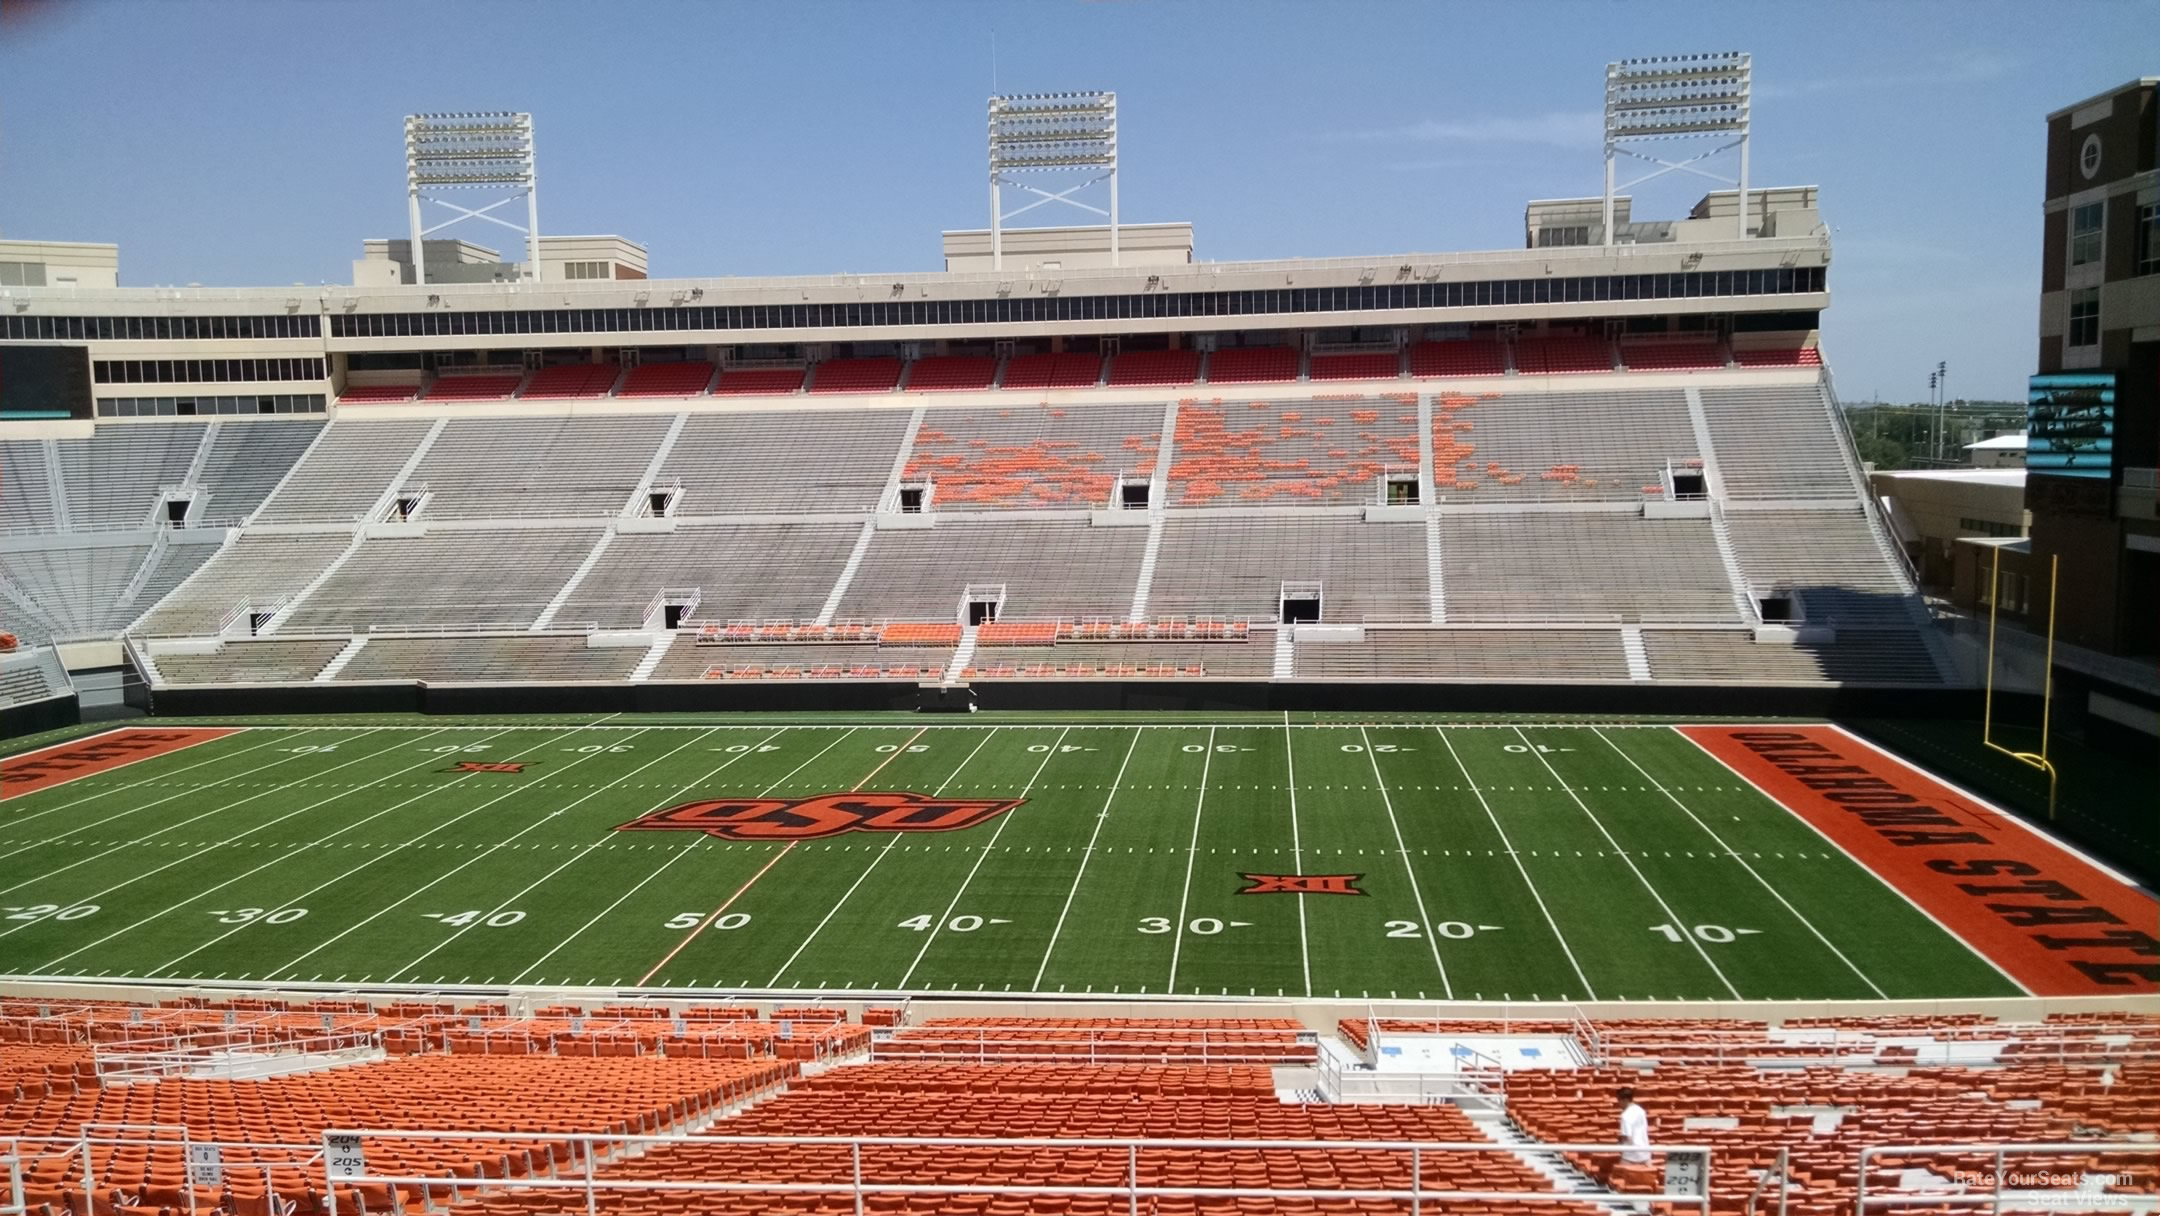 section 304, row 19 seat view  - boone pickens stadium